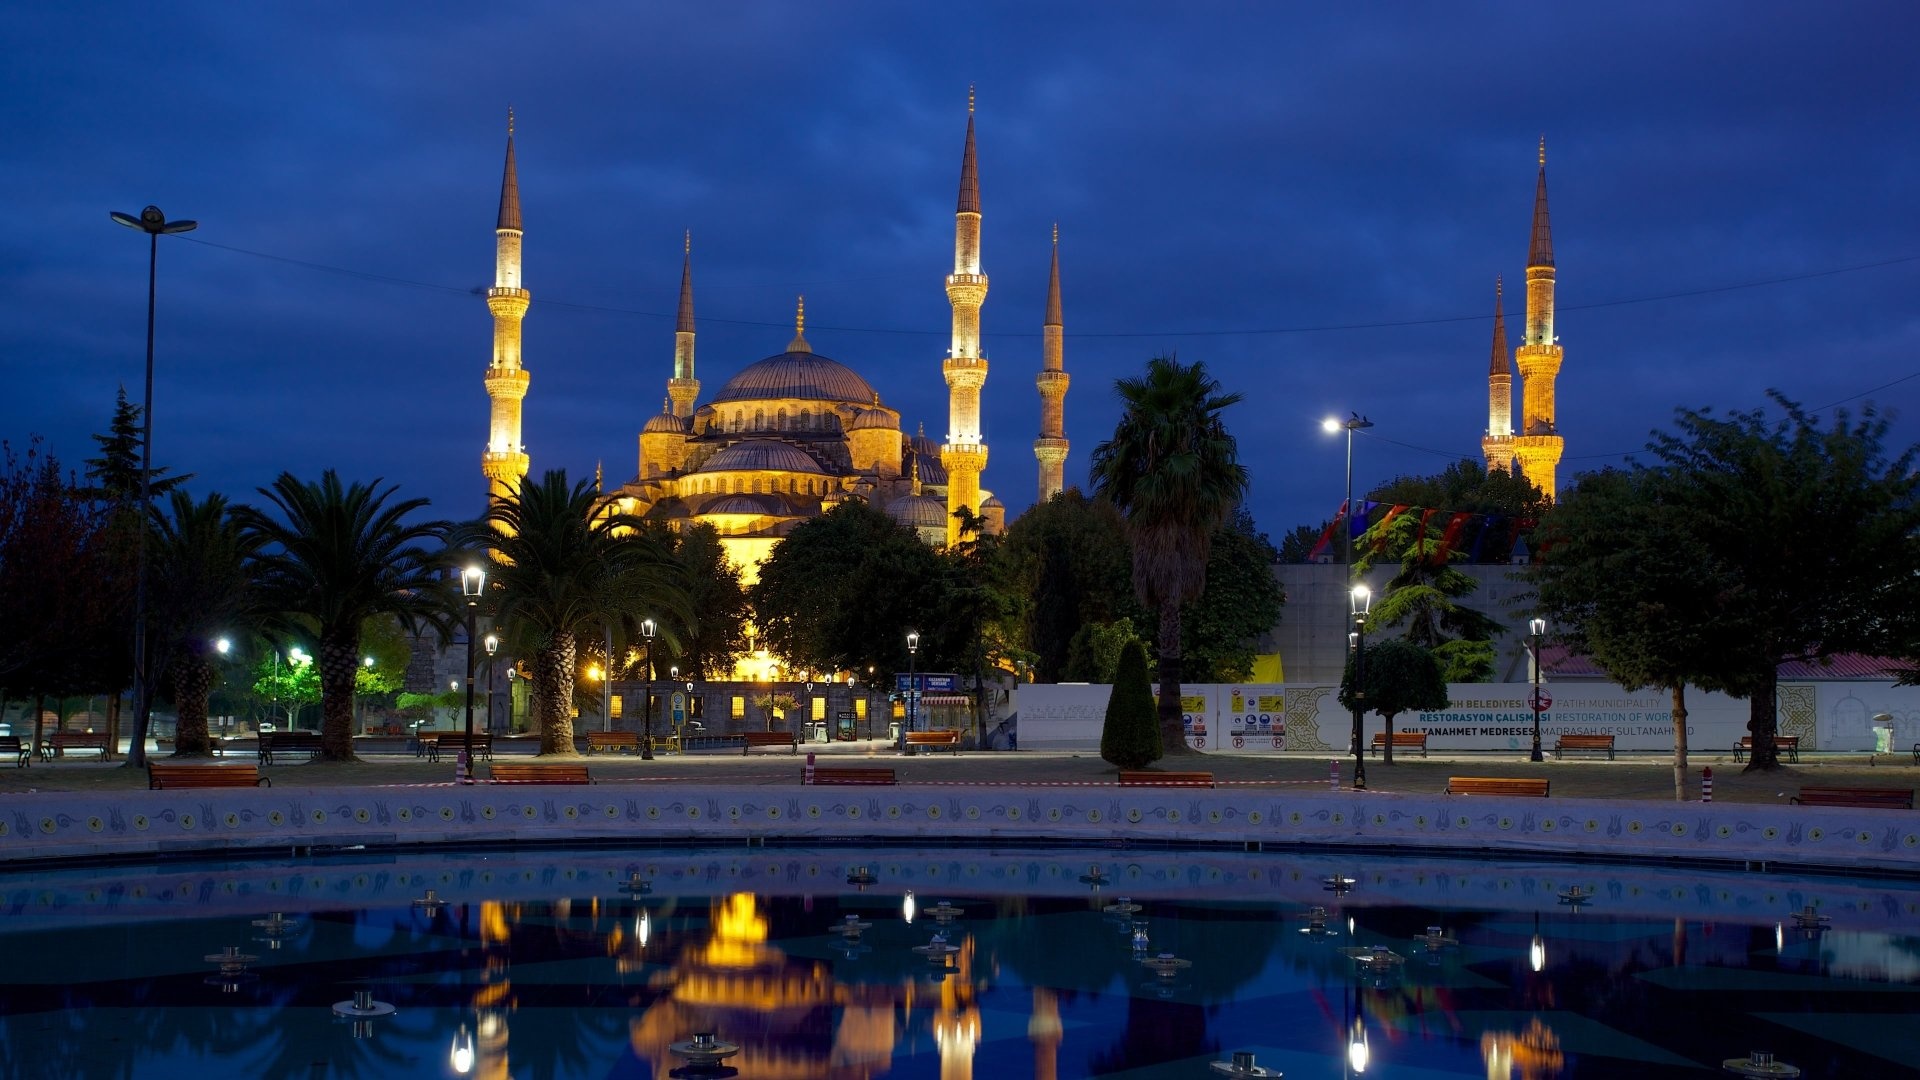 Sultan Ahmed Mosque Wallpapers, Background Images, Mosque, Travel, 1920x1080 Full HD Desktop